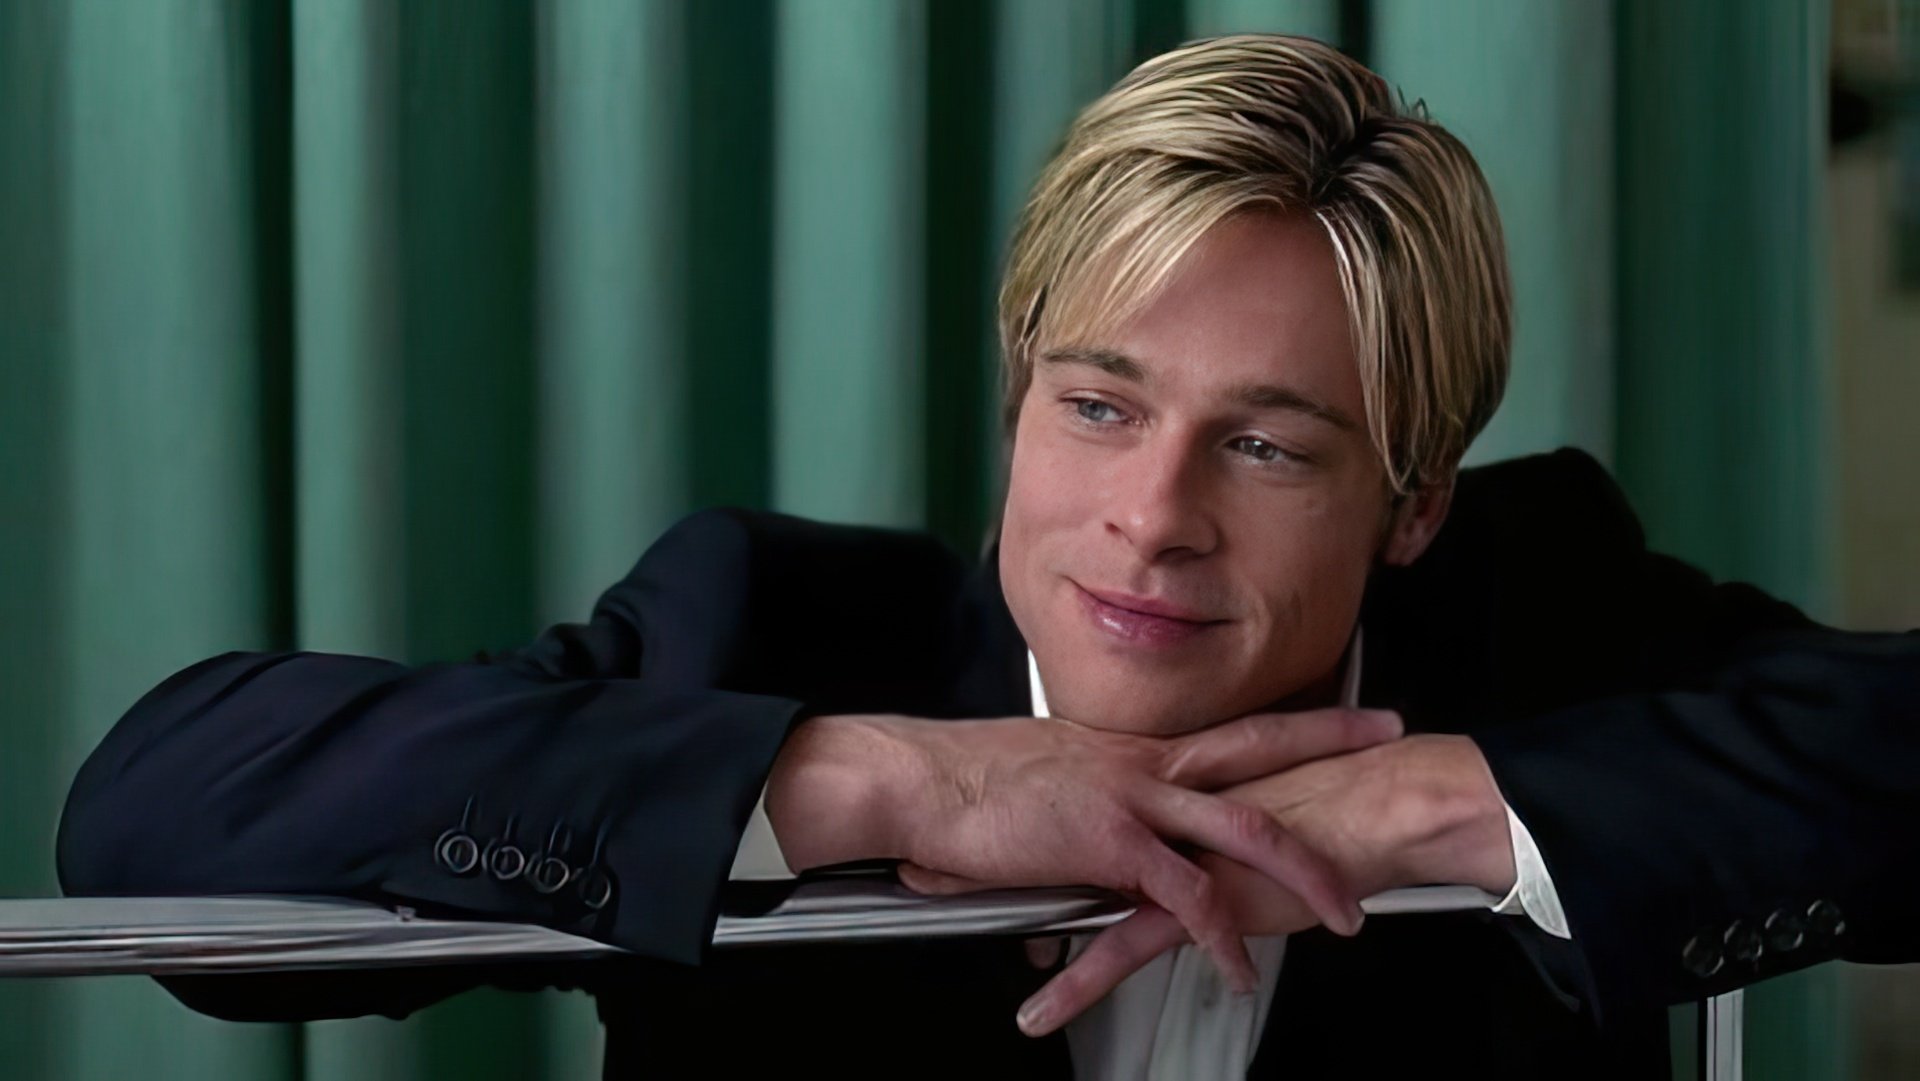 Brad Pitt is the most charming Death that might have been